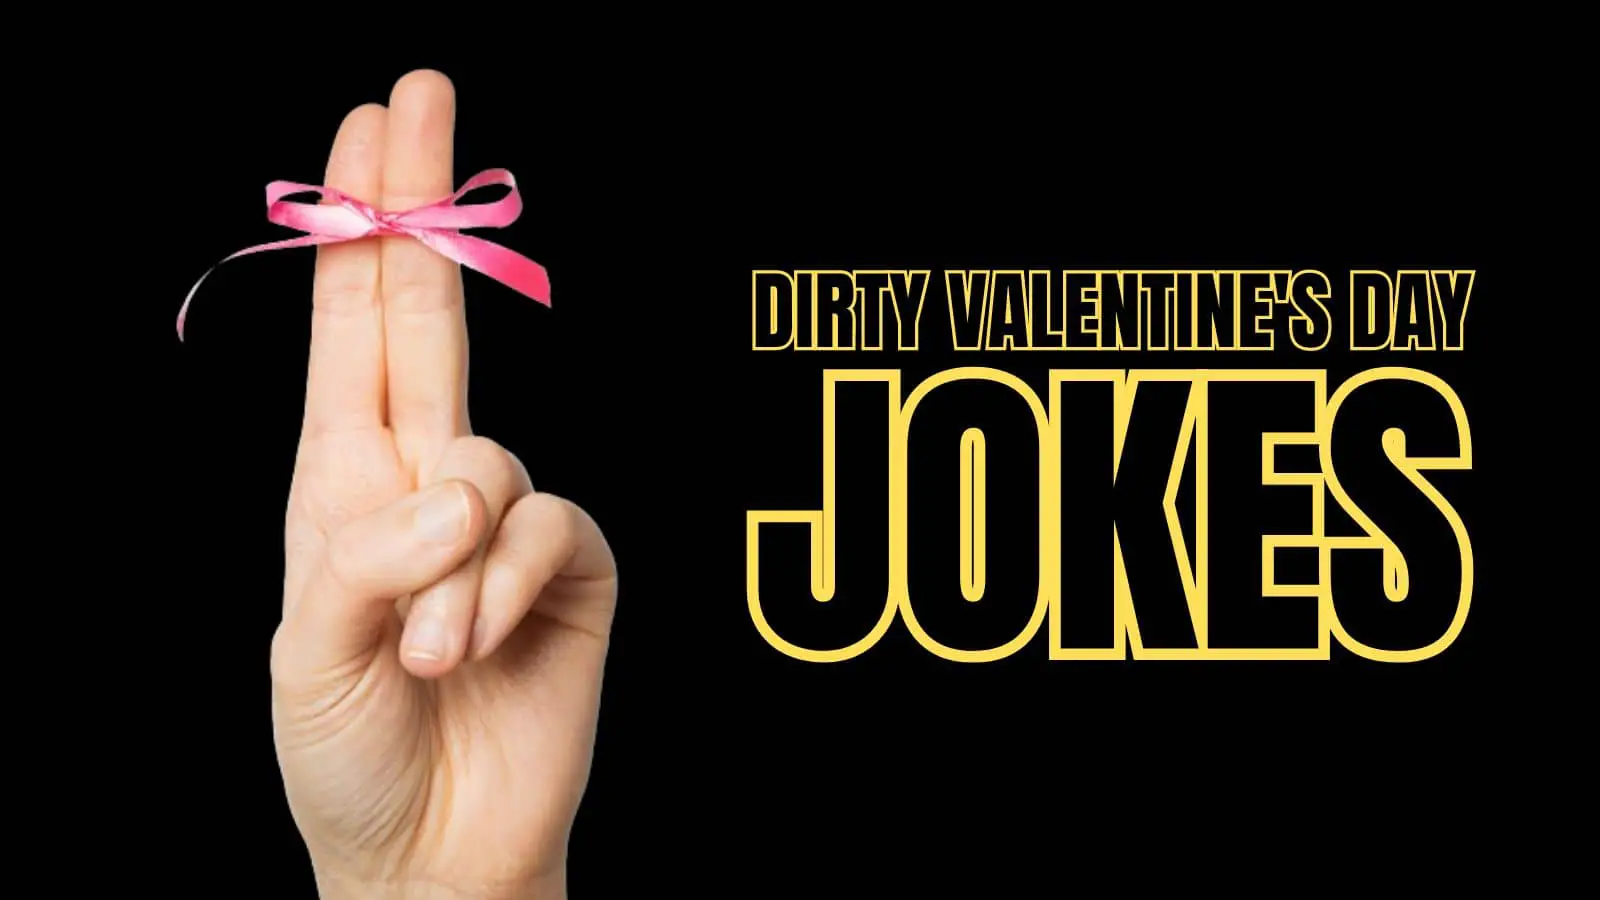 Dirty Valentine's Day Jokes for Adults